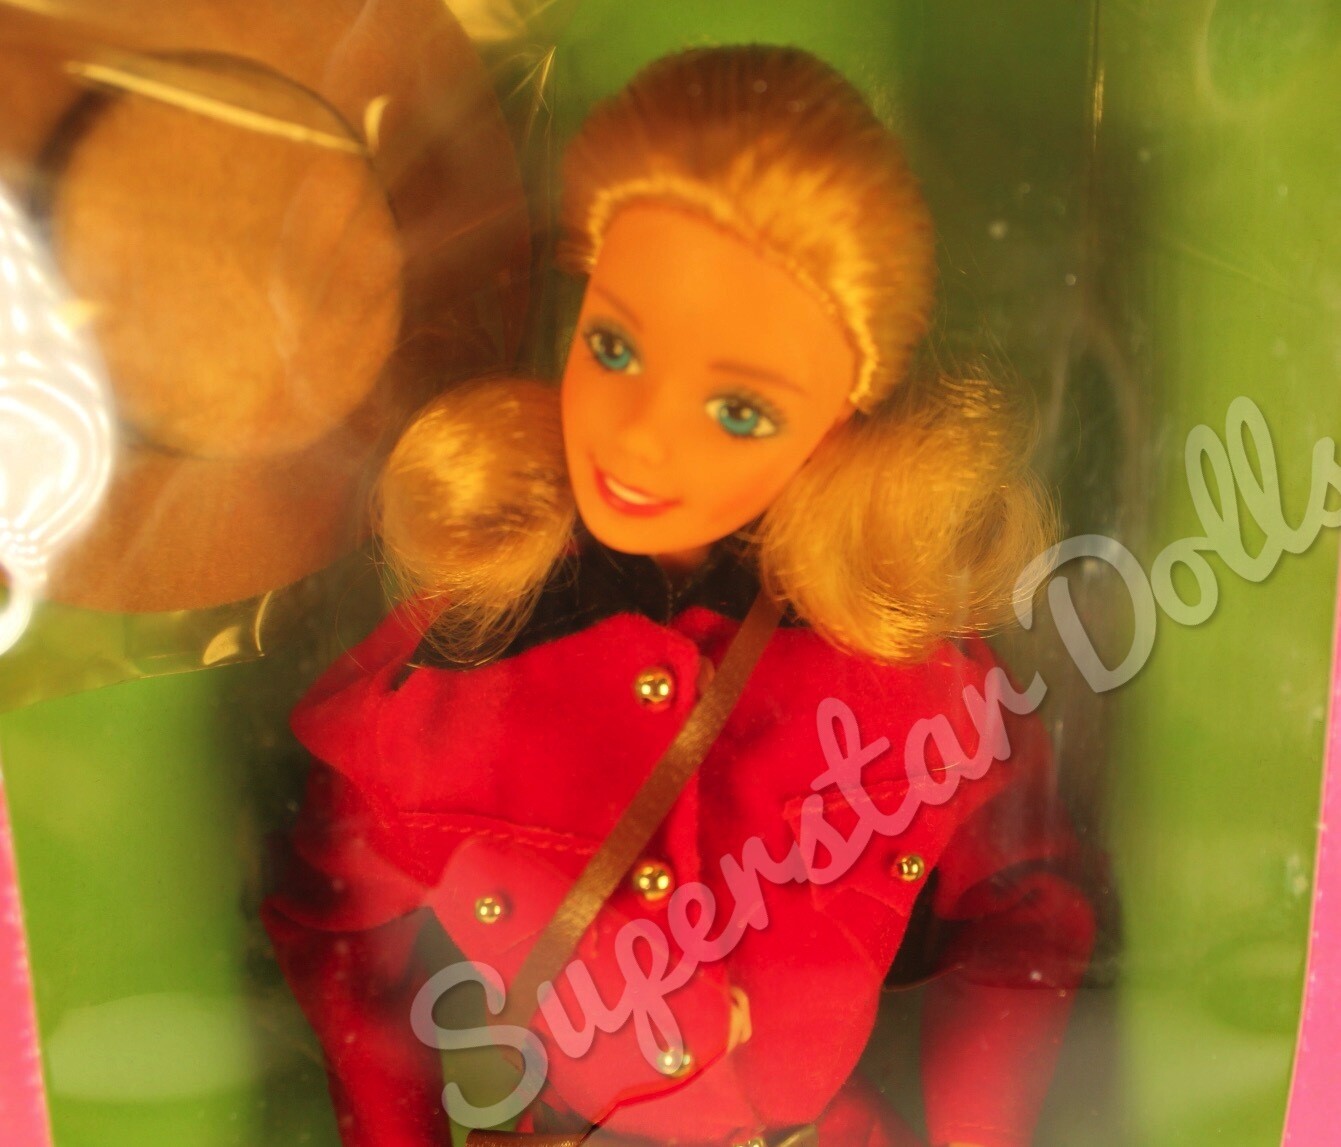 1987 Canadian Barbie Doll from the Dolls of the World Collection